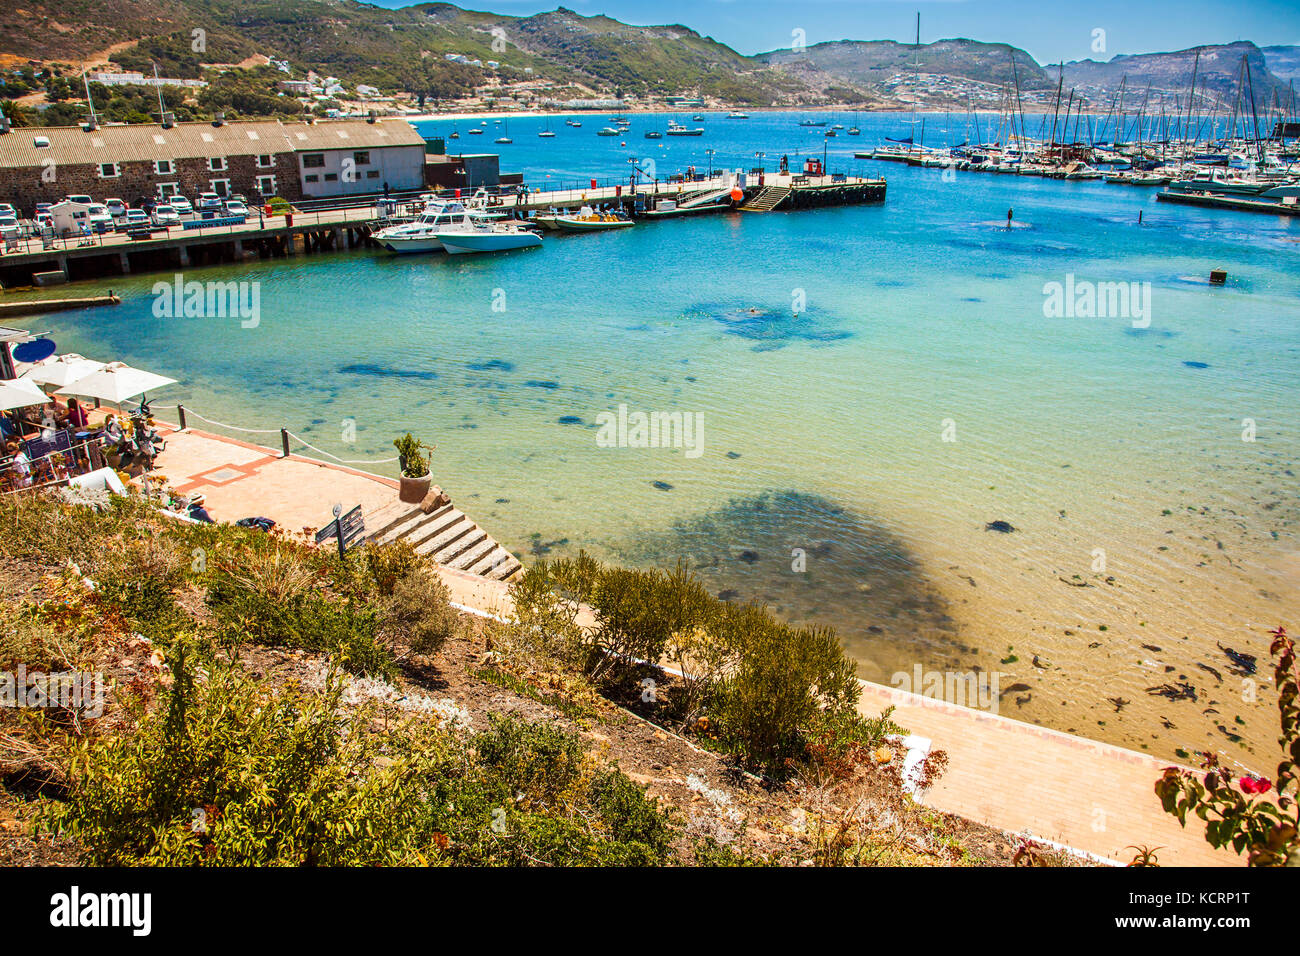 View of the harbor of St. James South Africa Stock Photo